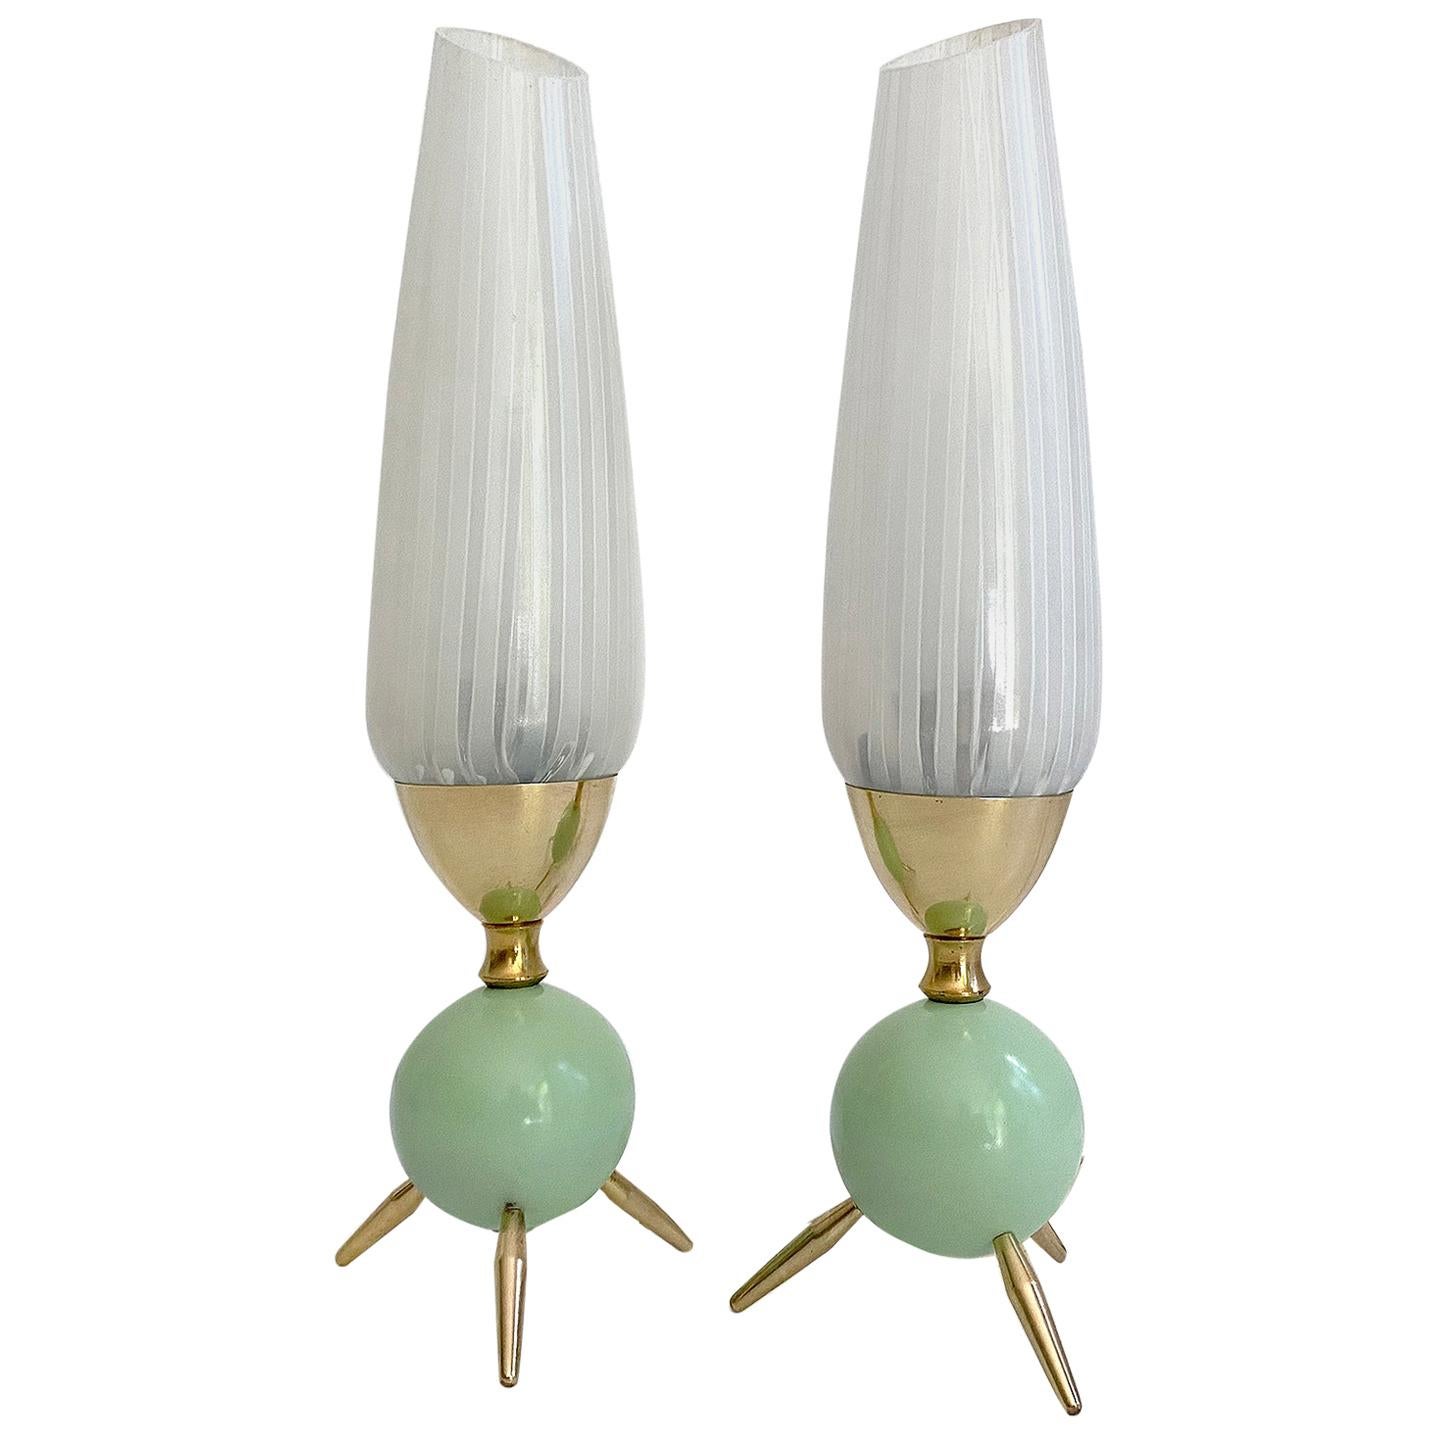  Pair of UNIQUE Tripod Table Lamps Lights, Stilnovo Style, Brass Glass, 1950s  For Sale